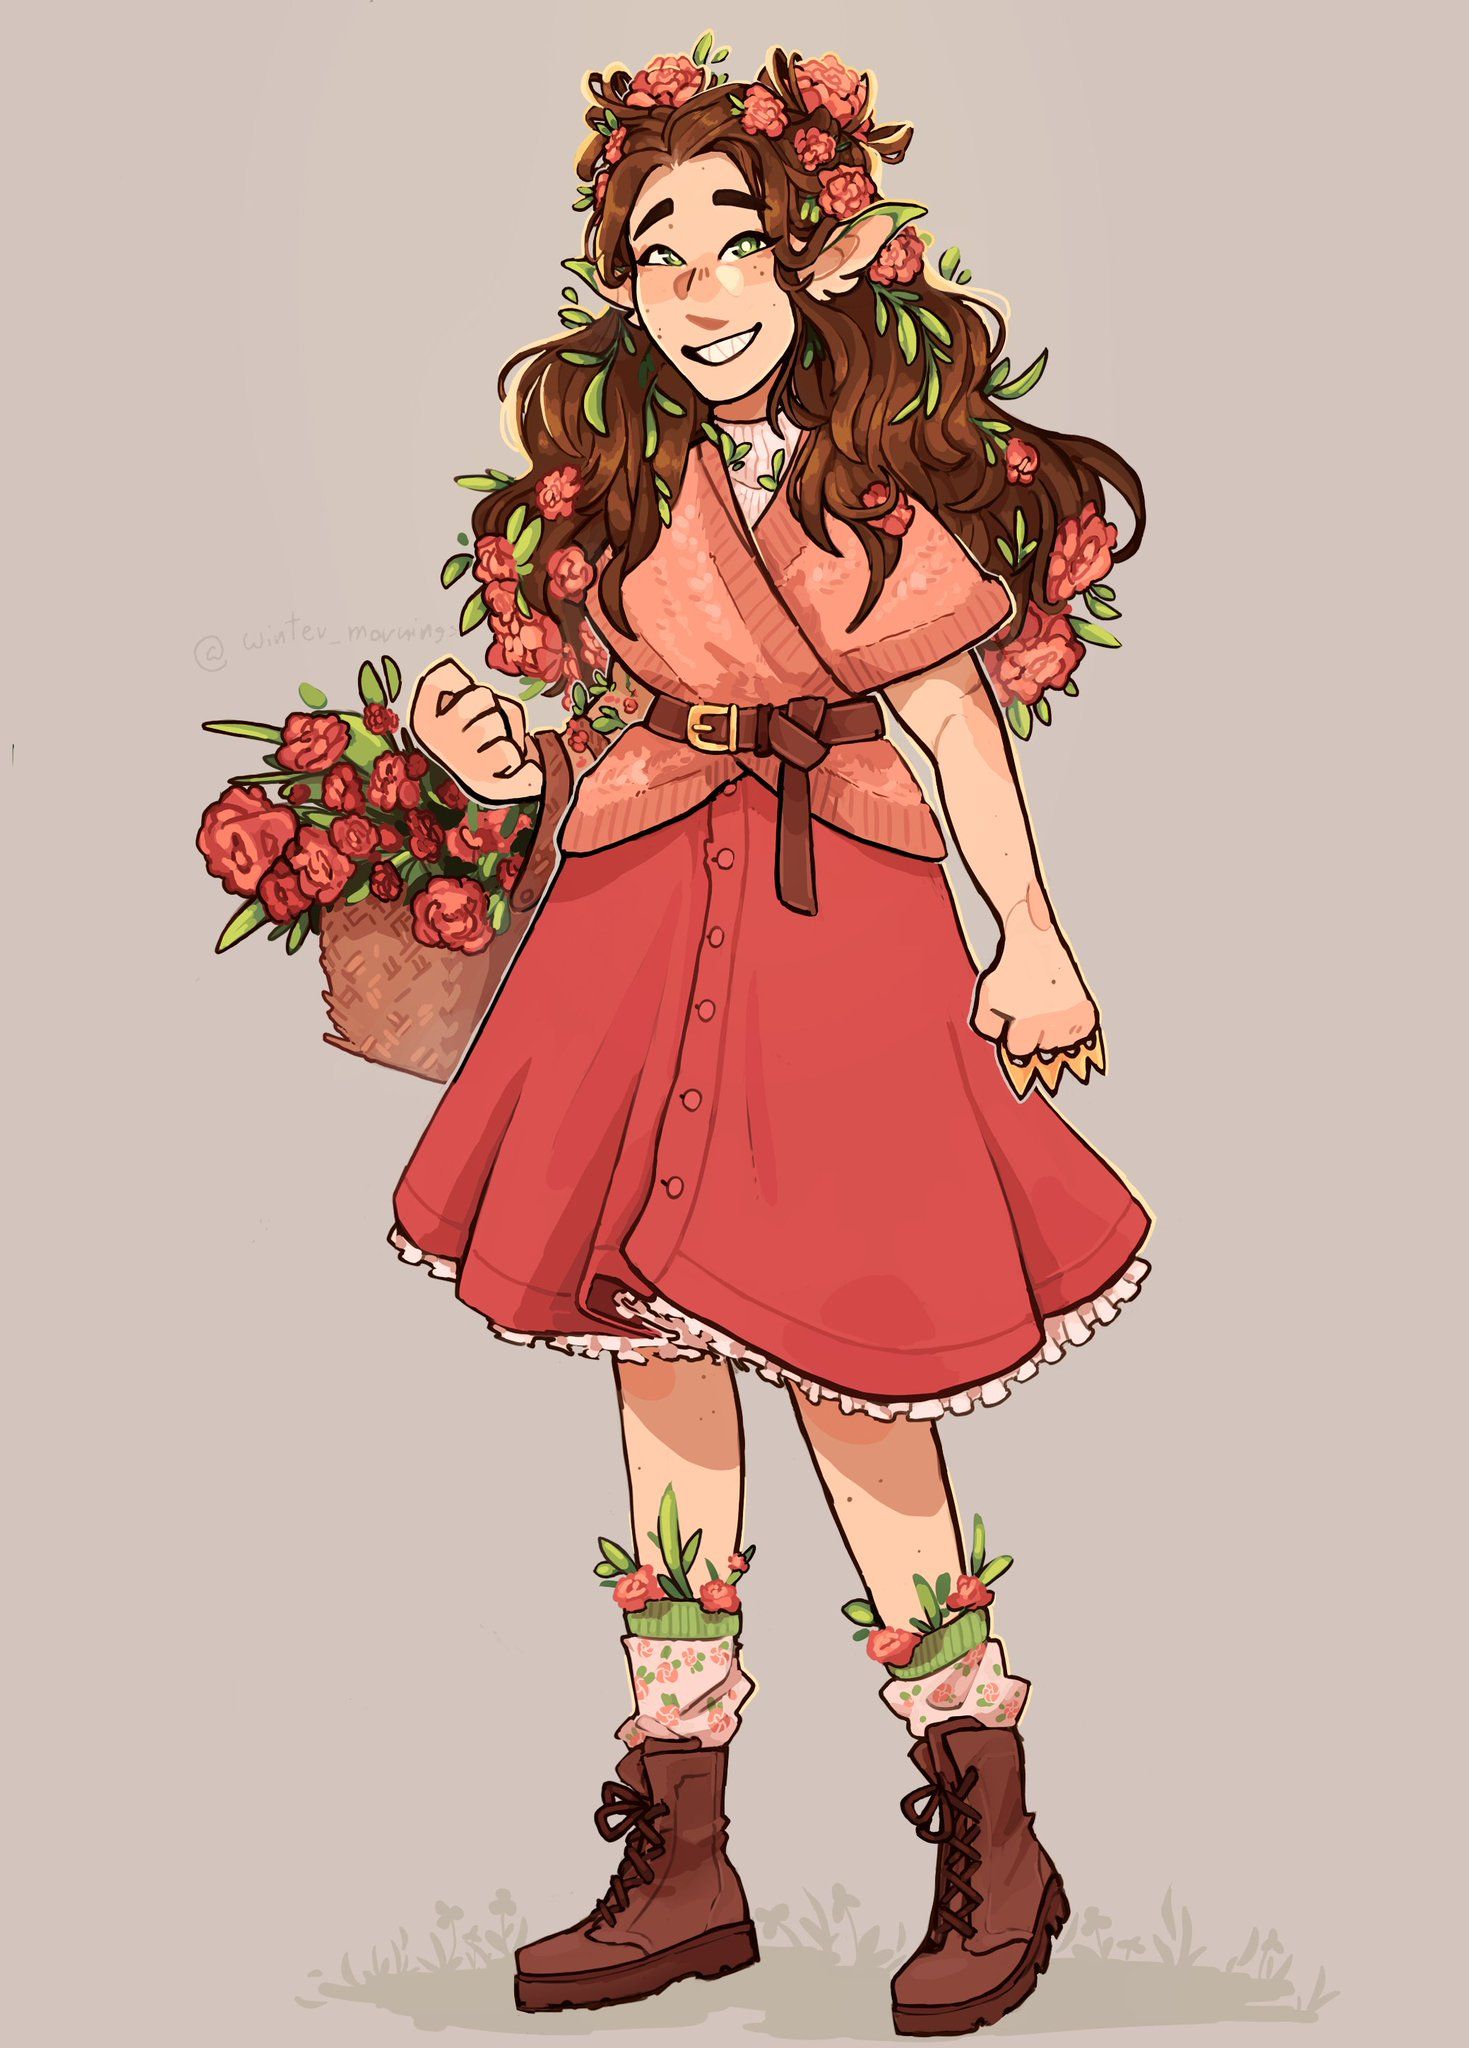 A drawing of Hannah. She's smiling for the camera, dressed in a more detailed version of her Minecrafkt skin's outfit. There's a belt around her waist, tying off her sweater. There are buttons running the length of her skirt. She wears hiking boots with tall white socks. Grass and roses stick out of her socks and hair. She's carrying a basket full of the same grass and roses. She also has elf-like ears.